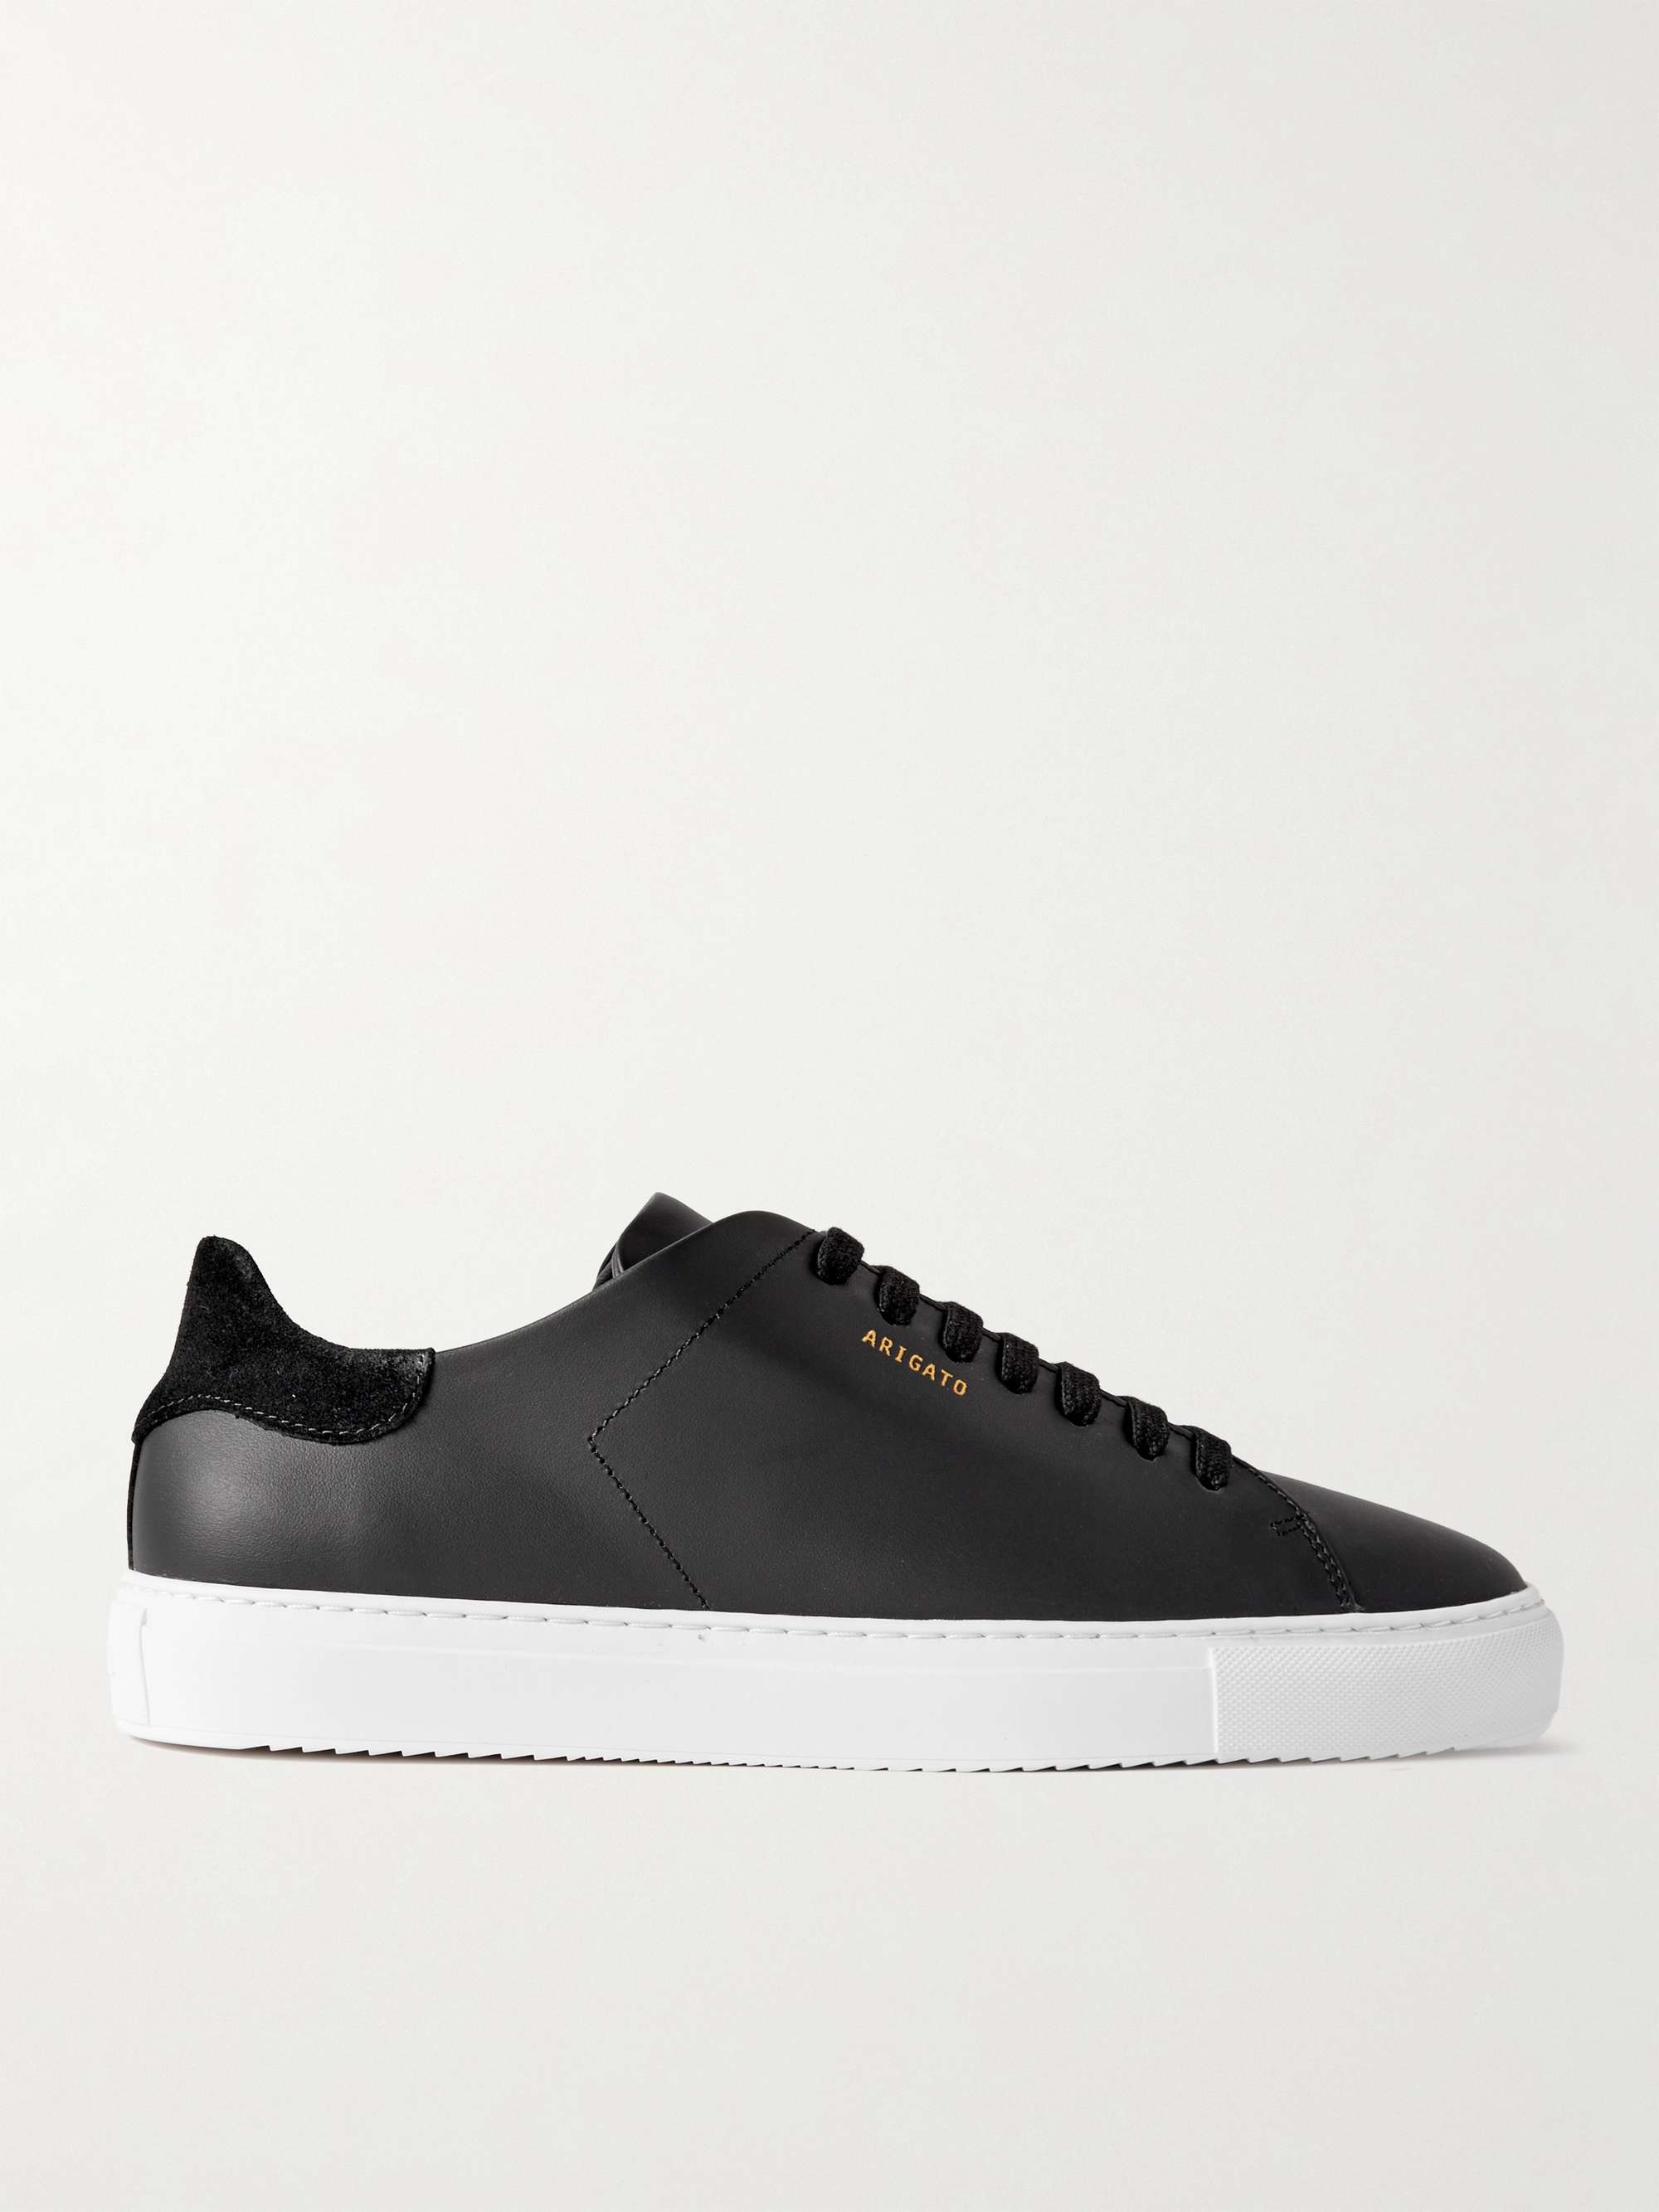 Black Clean 90 Leather Sneakers | AXEL ARIGATO | MR PORTER